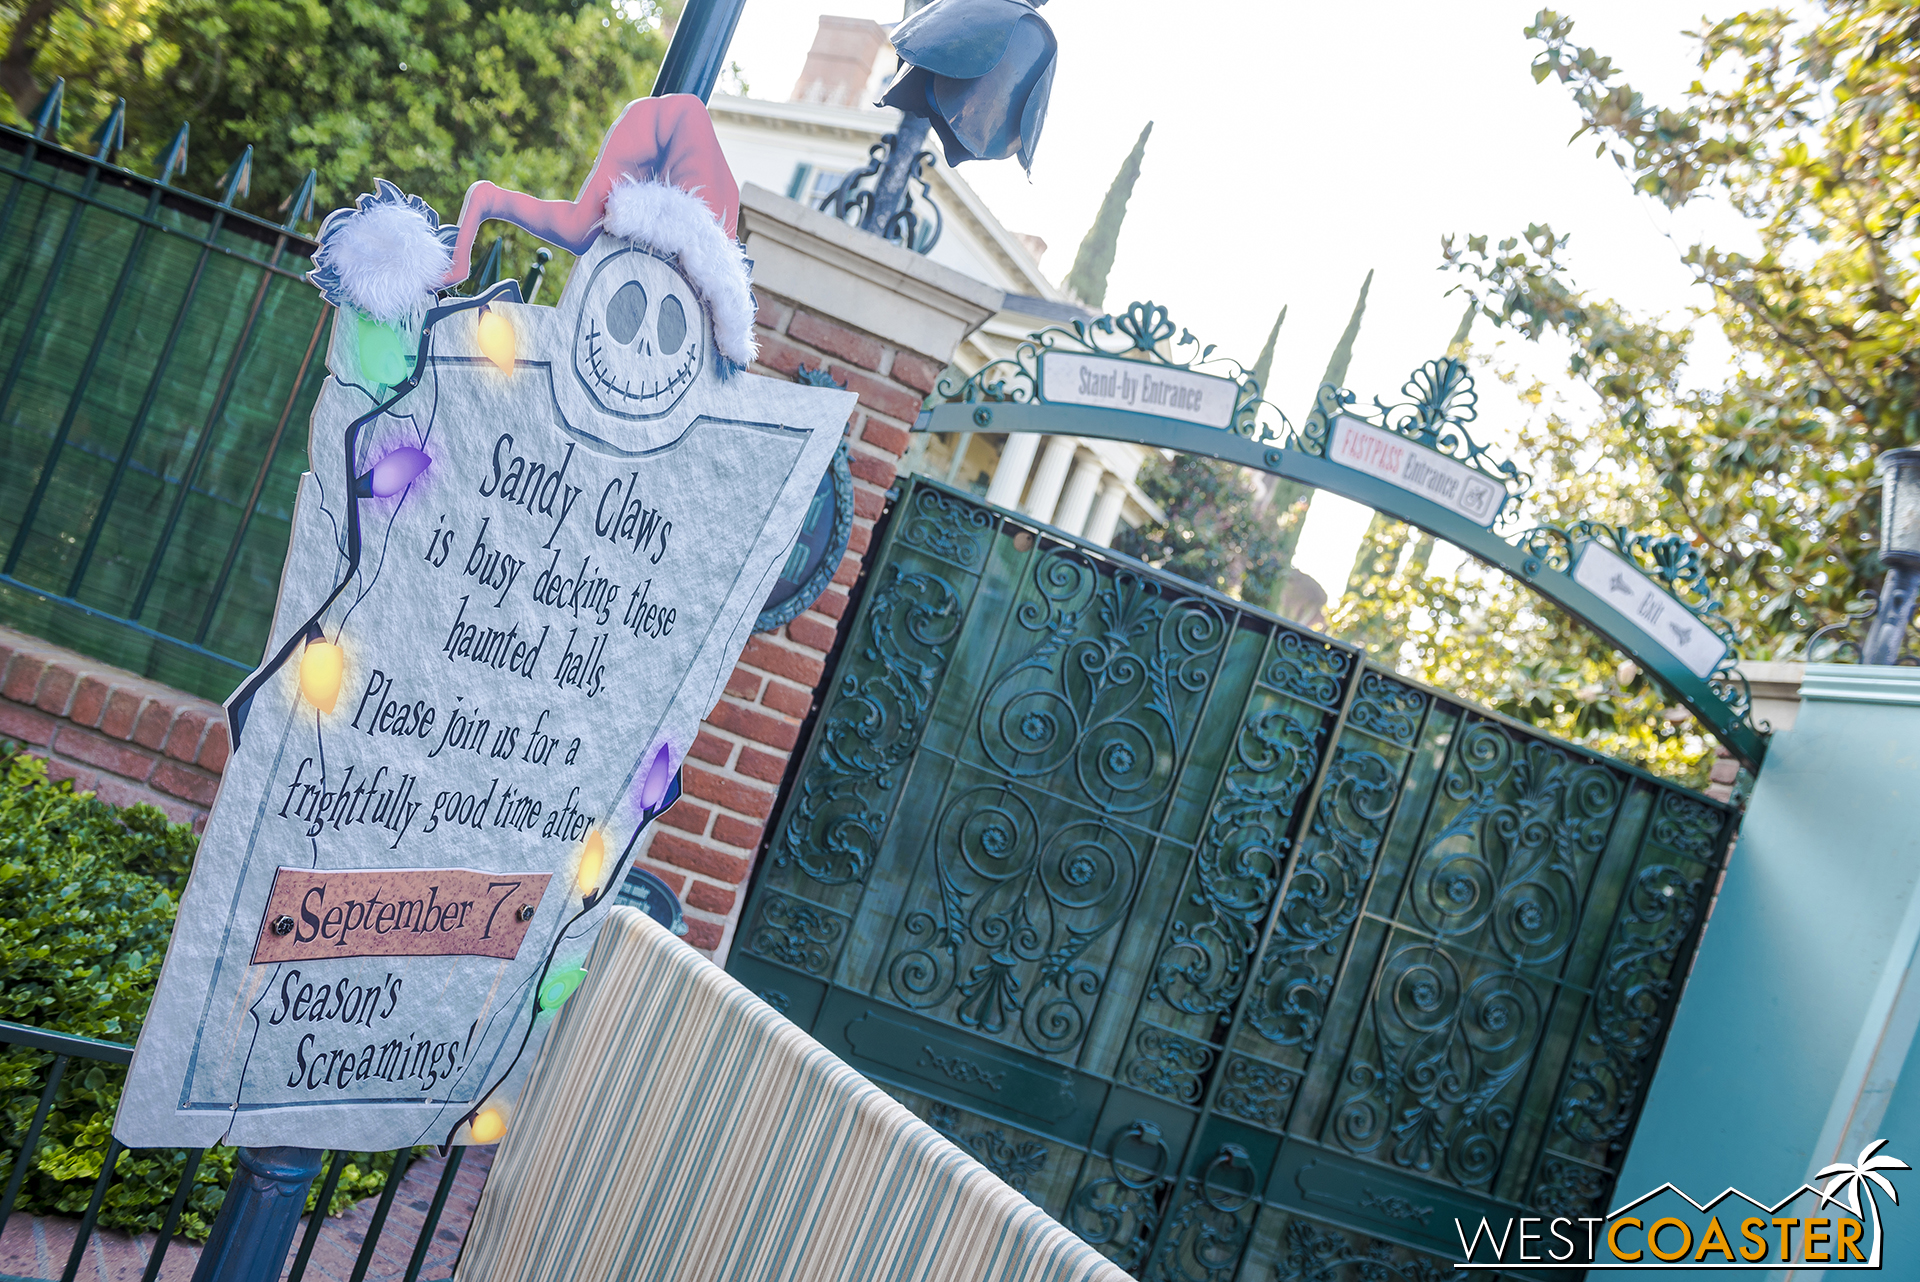  Don’t worry.  We’ll be seeing the new gingerbread house (and perhaps other new additions?) in a week and a half. 